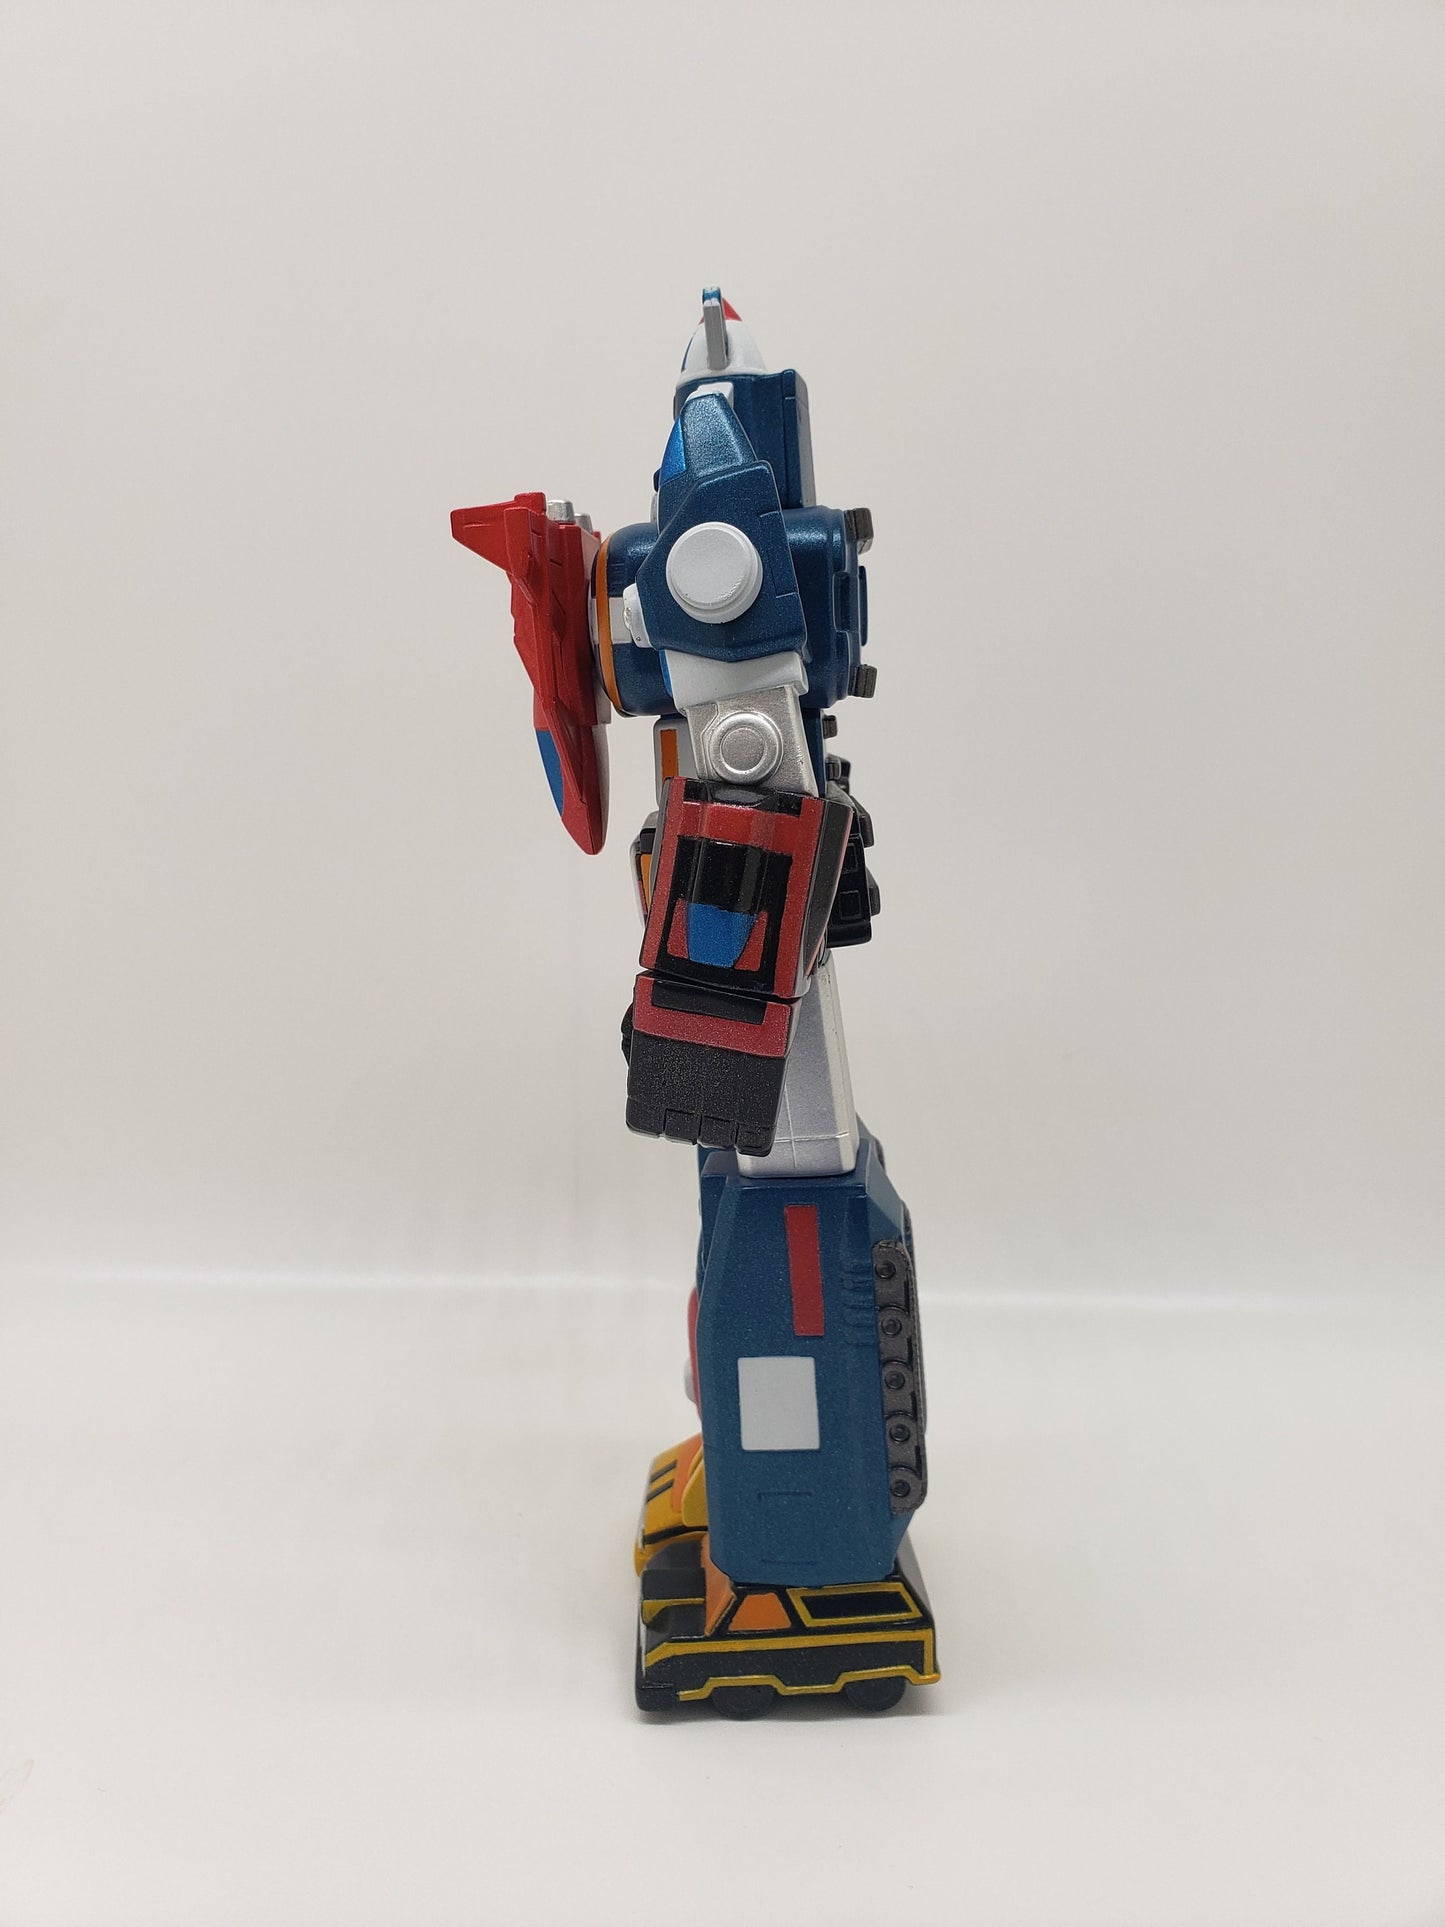 Toynami Vehicle Voltron Vinyl Action Figure Red 2010 WEP Vintage Collectable Vinyl Designer Toy Pop Culture Perfect Birthday Gift